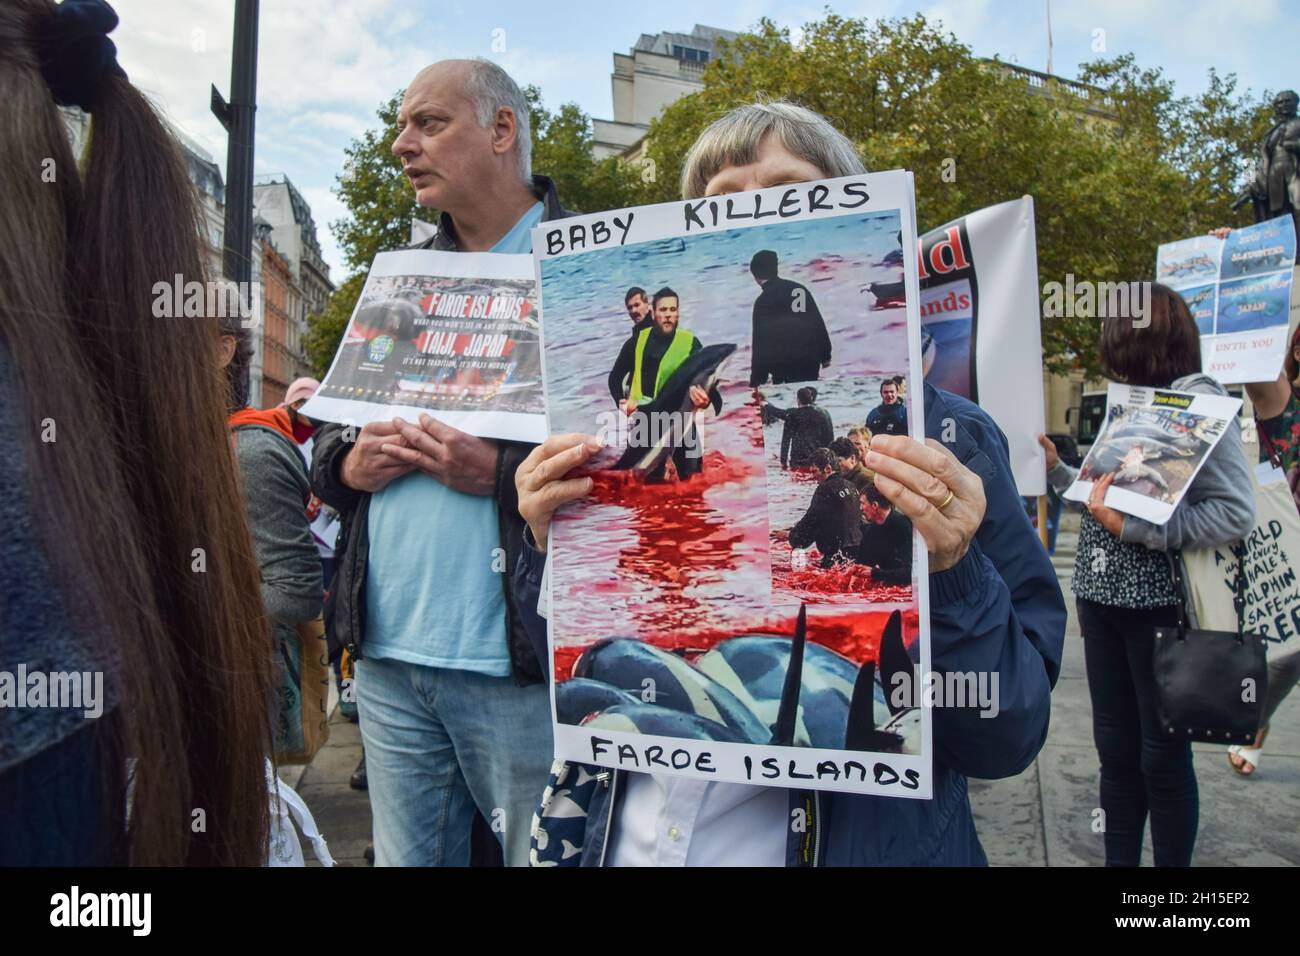 London, UK. 16th Oct, 2021. A protester holds a placard with a graphic image of dolphin killing in Faroe Islands during the demonstration in Trafalgar Square.Members of marine conservation organization Sea Shepherd and other activists marched through Westminster, calling for an end to the slaughter of dolphins in Faroe Islands and Taiji, Japan. Credit: SOPA Images Limited/Alamy Live News Stock Photo